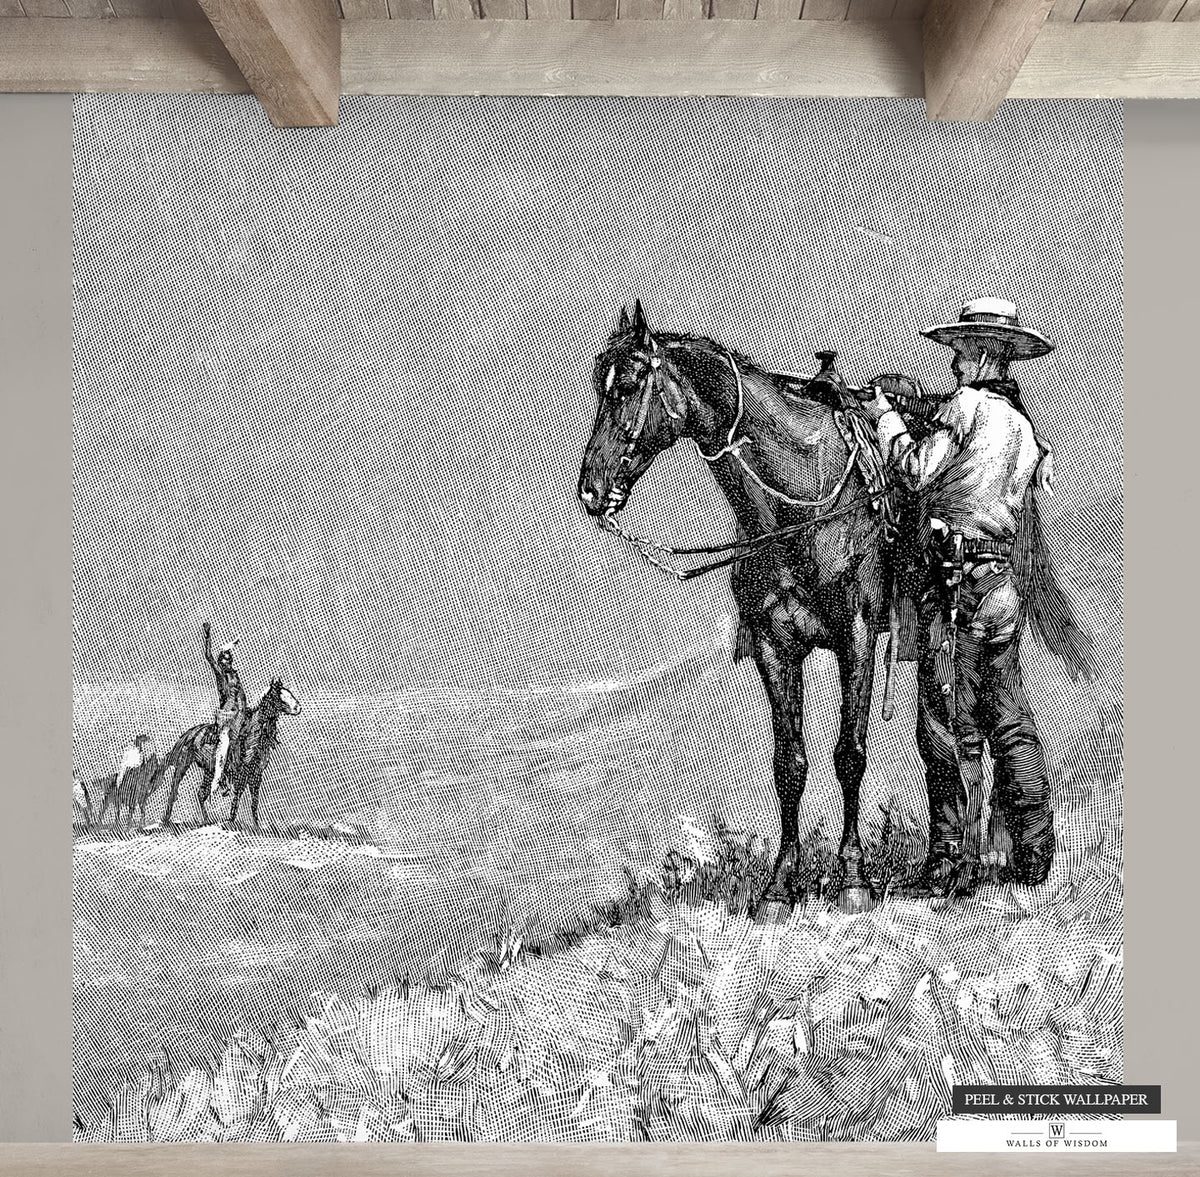 Historic Cowboy and Indians Mural, a monochrome statement piece for Western interiors.